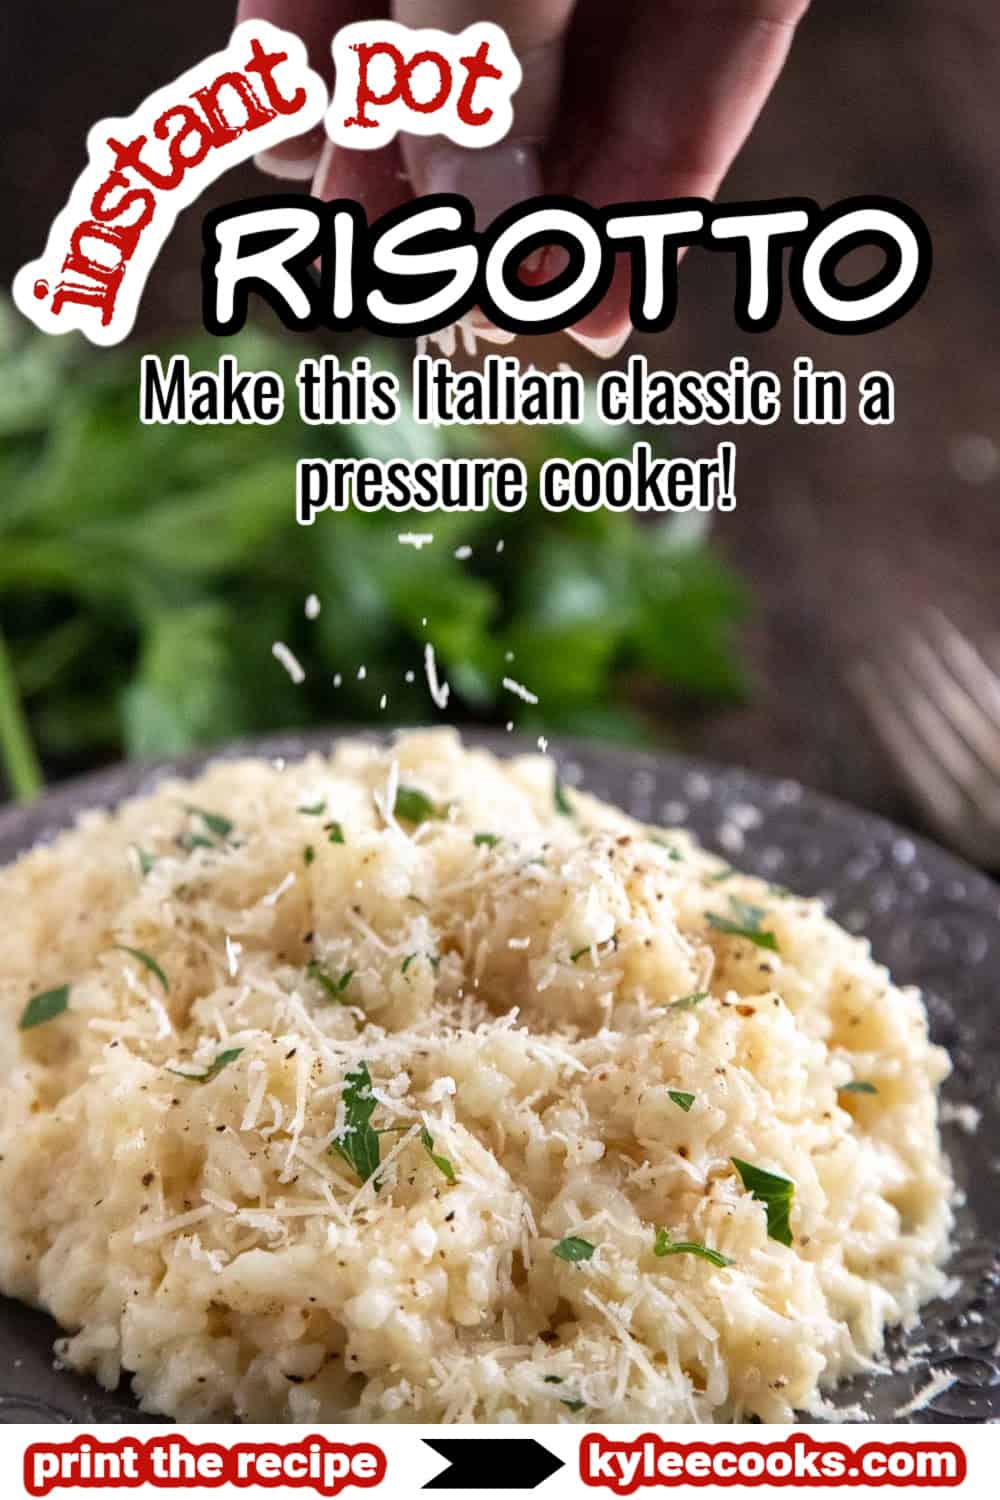 instant pot risotto with recipe name overlaid in text.